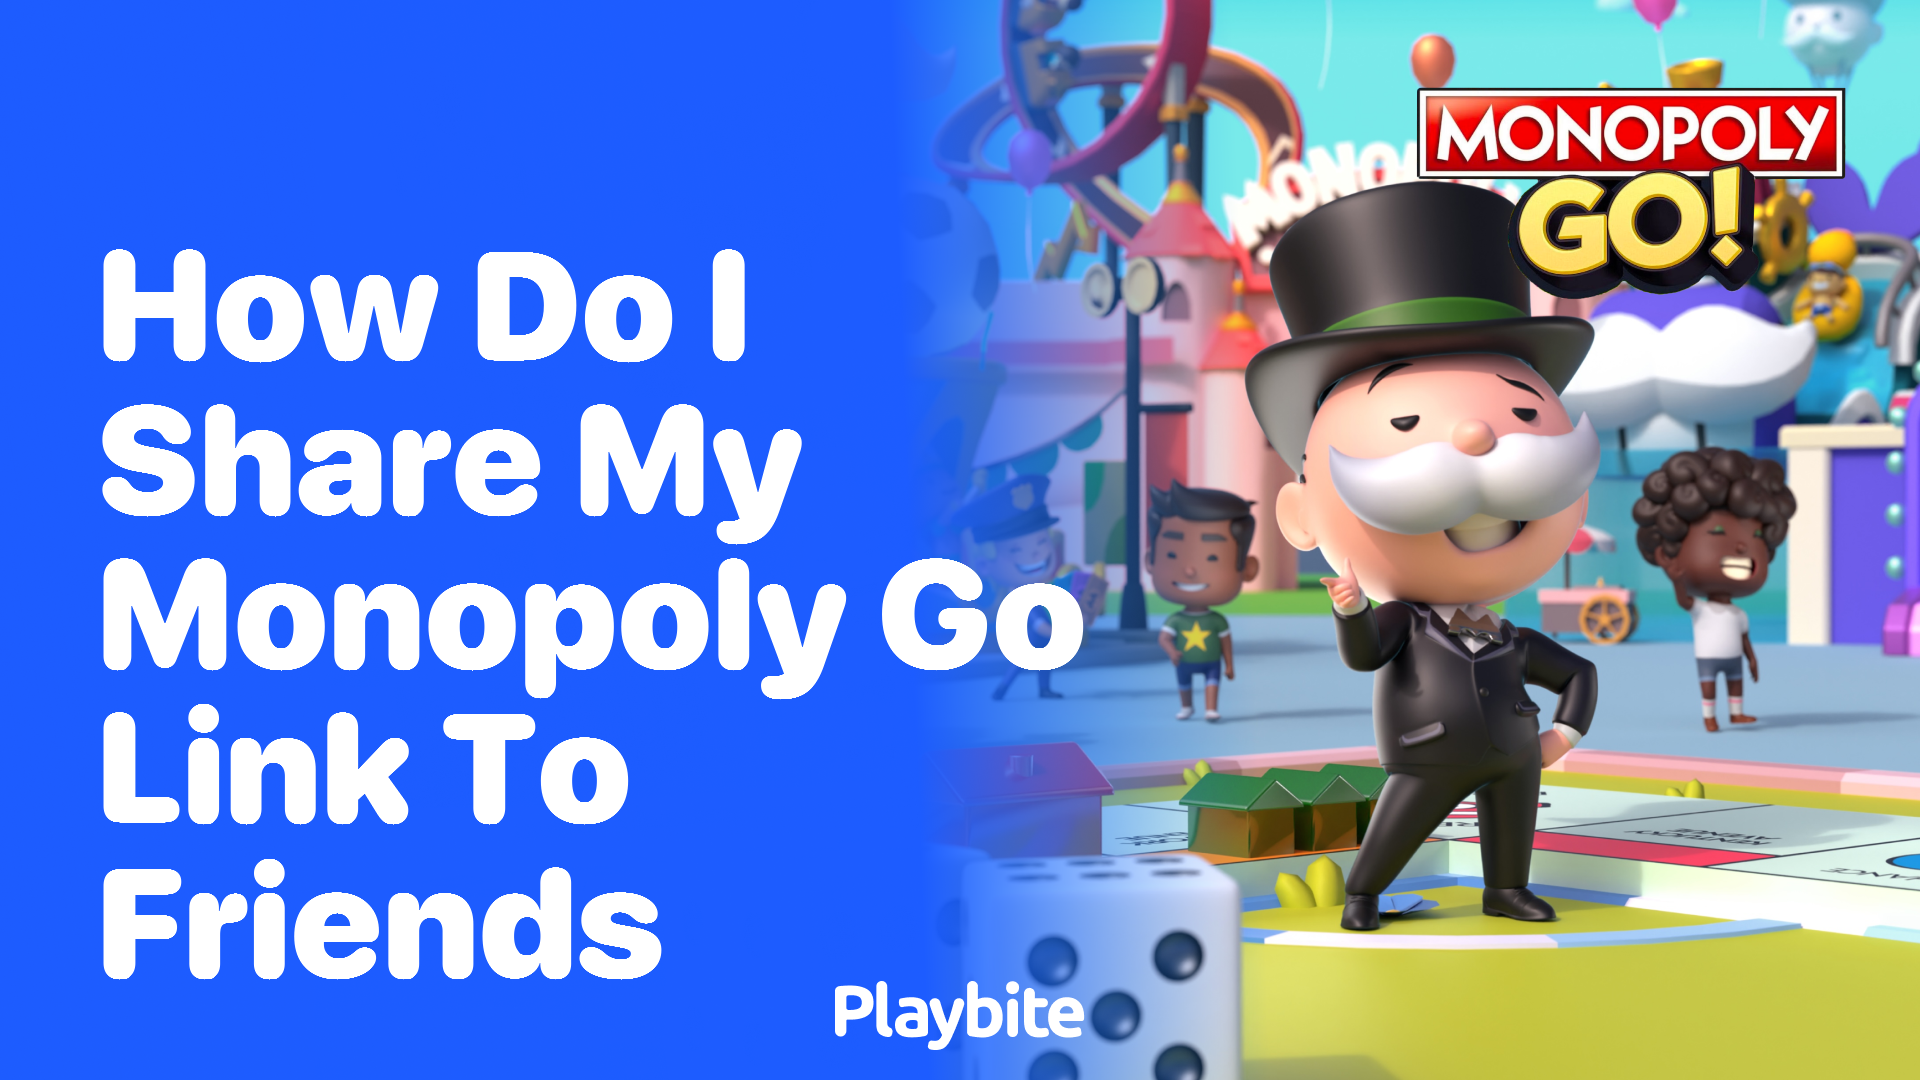 How Do I Share My Monopoly Go Link to Friends?